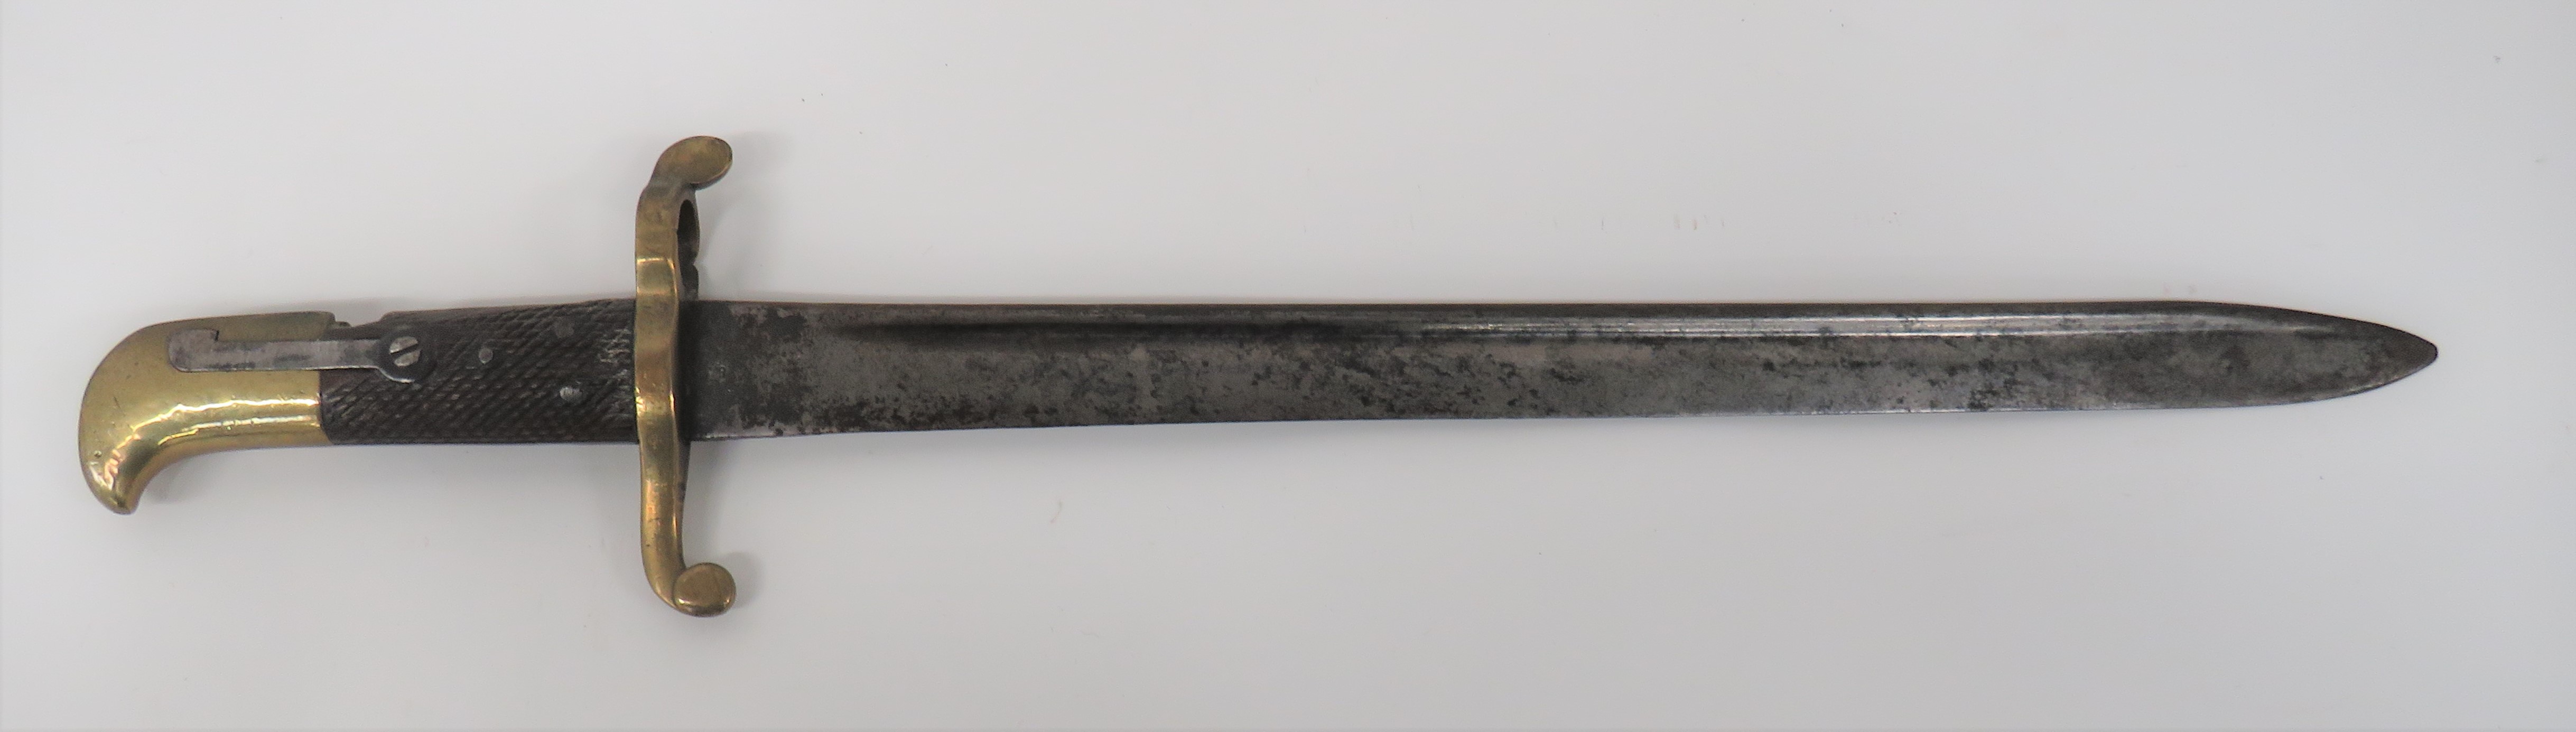 1897 Pattern Infantry Officer's Sword 32 1/2 inch, dumbell blade with central fuller.  Traces of - Image 3 of 3